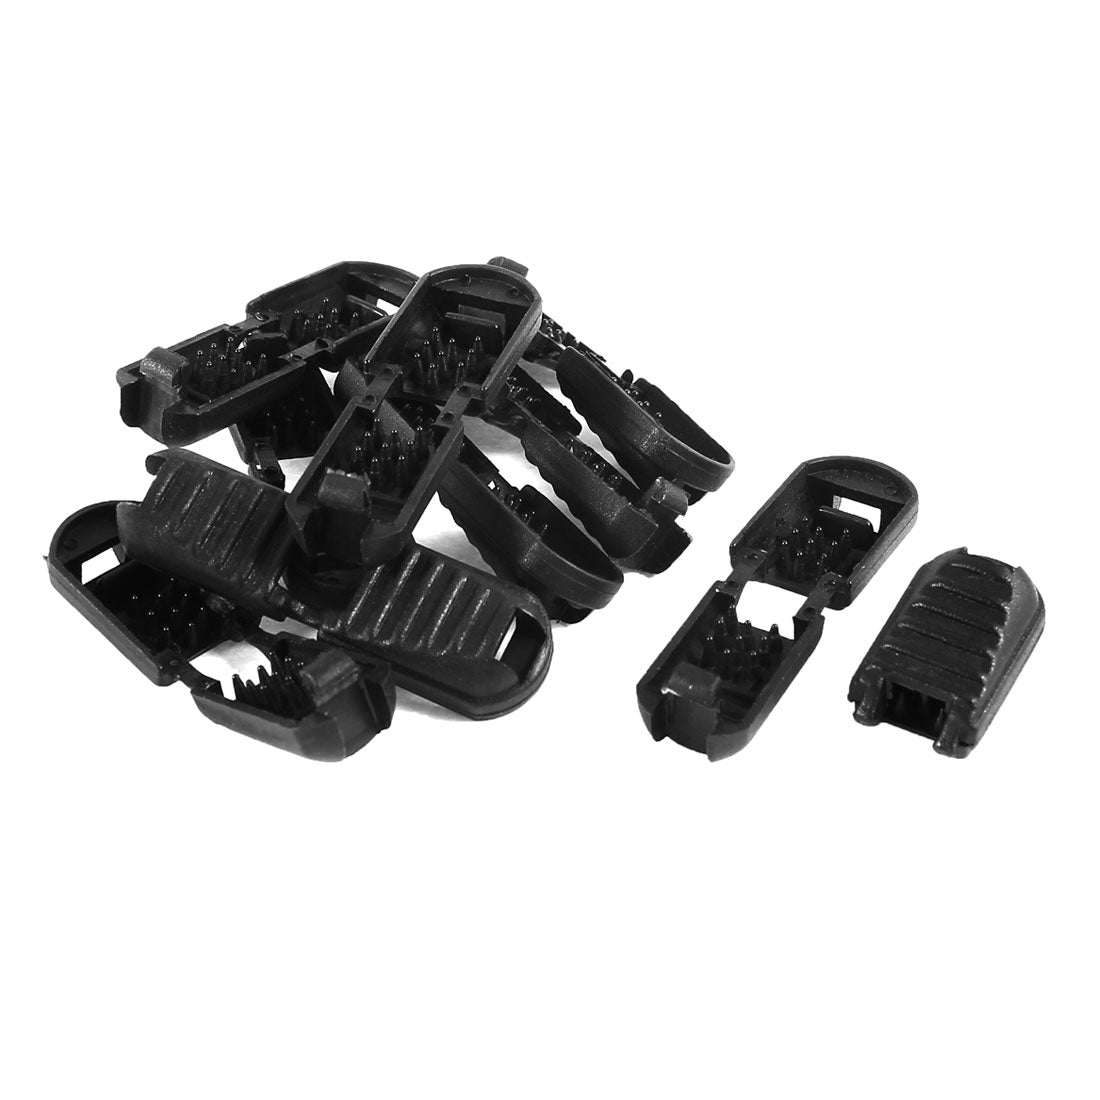 uxcell Uxcell 10pcs Zipper Pulls Cord Plastic Lock End Zip Clips Buckle Fitting Parts Black 5.4 x 5.2mm